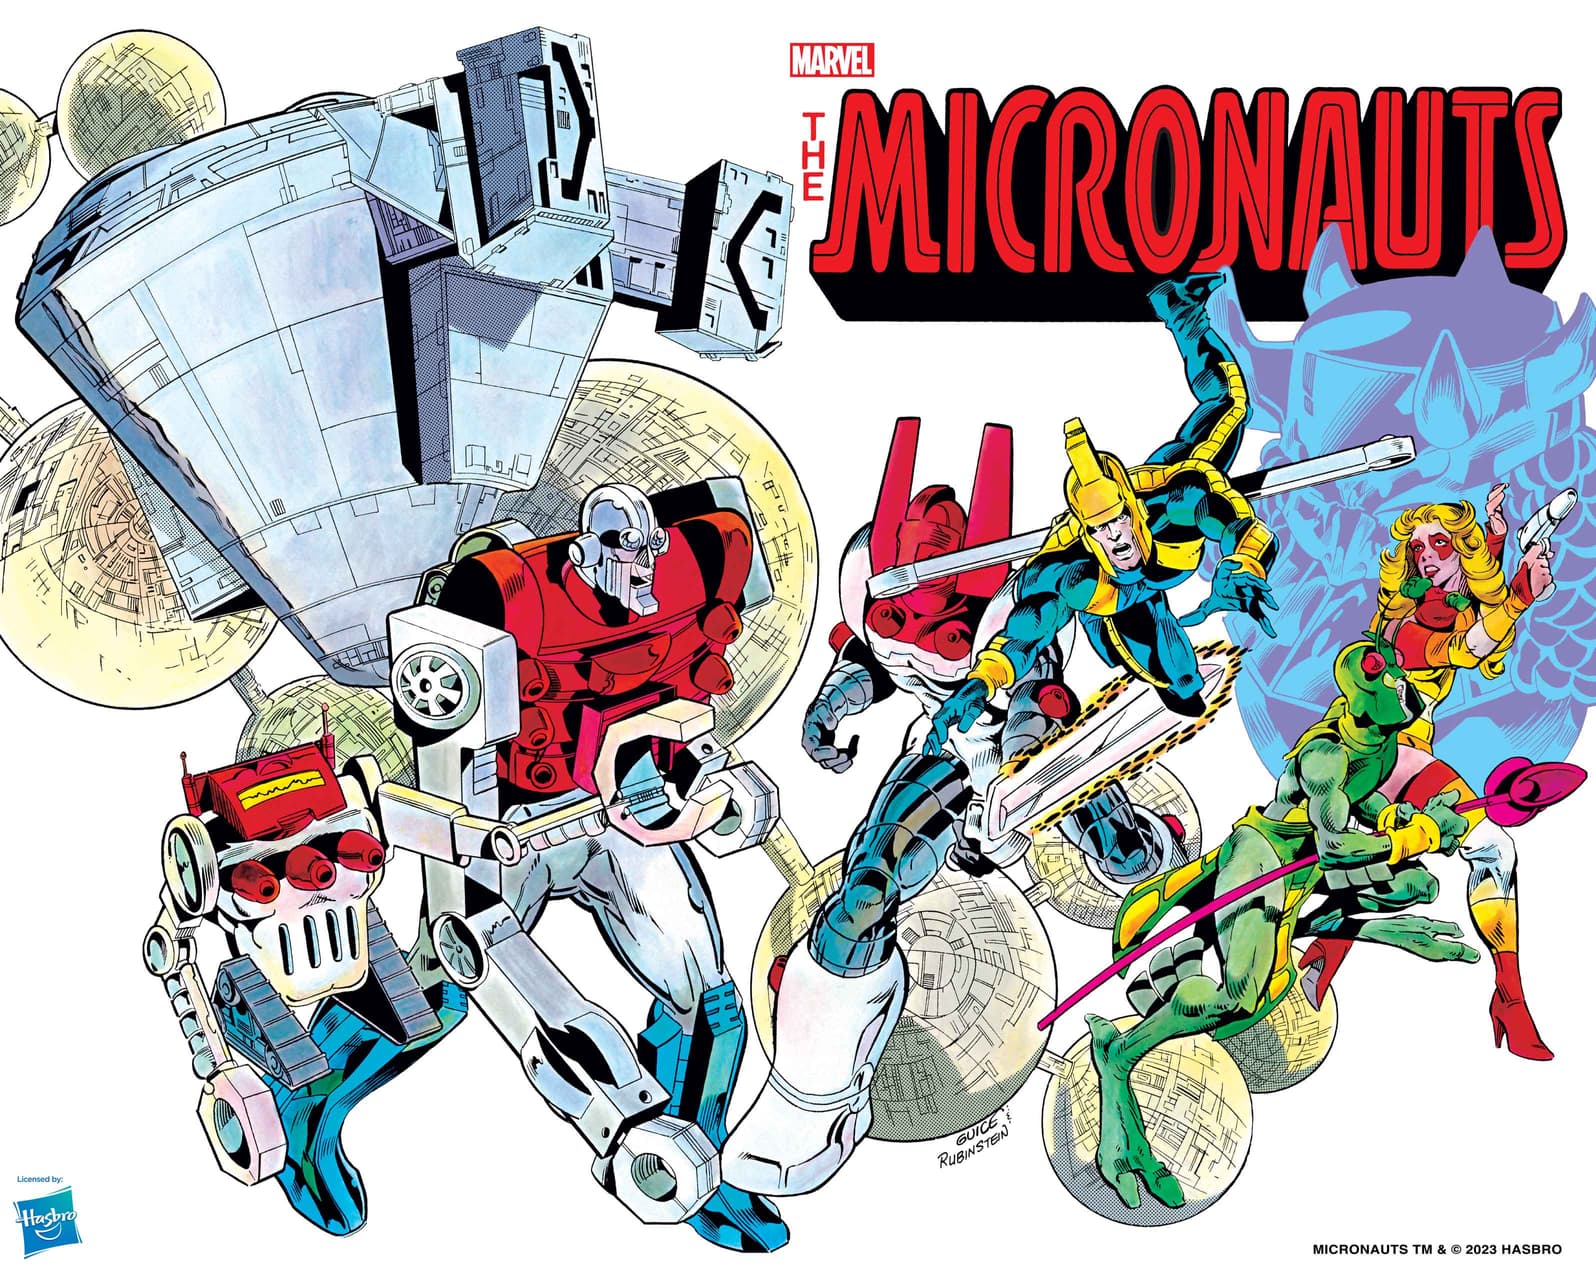 Micronauts Omnibus Vol. 1 Direct Market Exclusive Variant Cover by BUTCH GUICE